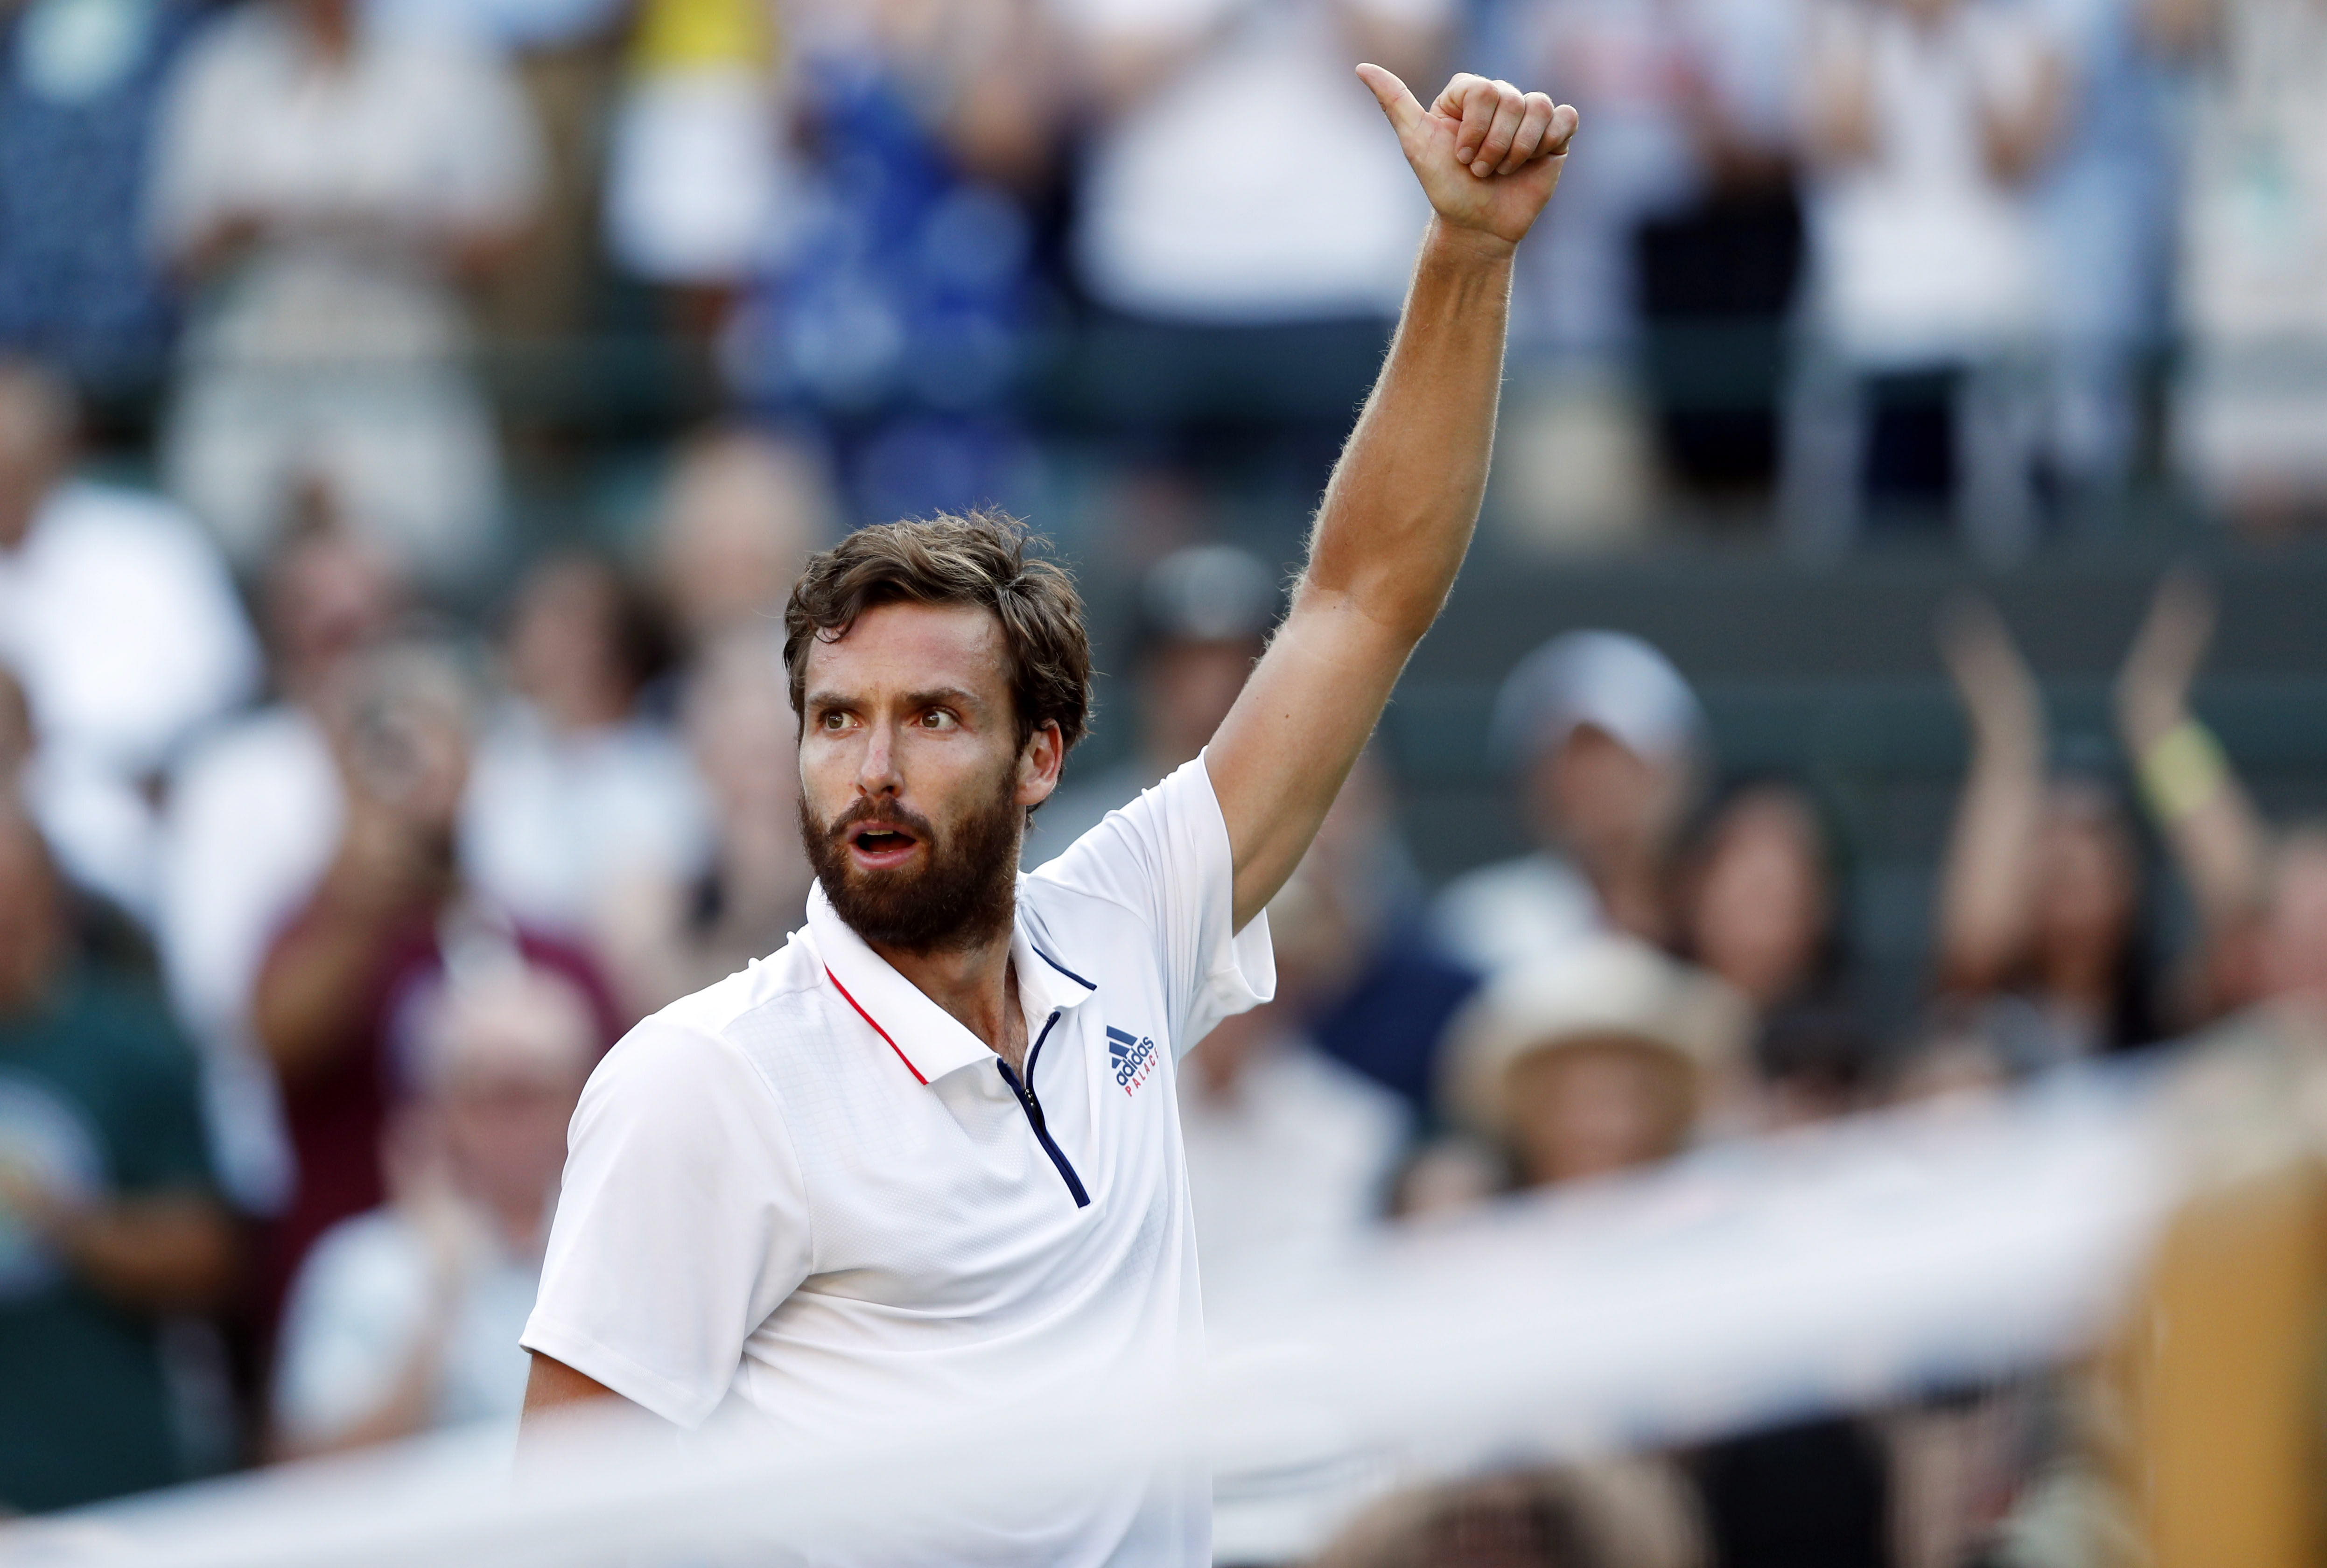 epa06872148 Ernests Gulbis of Latvia celebrates his win over Alexander Zverev of Germany in their third round match during the Wimbledon Championships at the All England Lawn Tennis Club, in London, Britain, 07 July 2018. EPA/NIC BOTHMA EDITORIAL USE ONLY/NO COMMERCIAL SALES